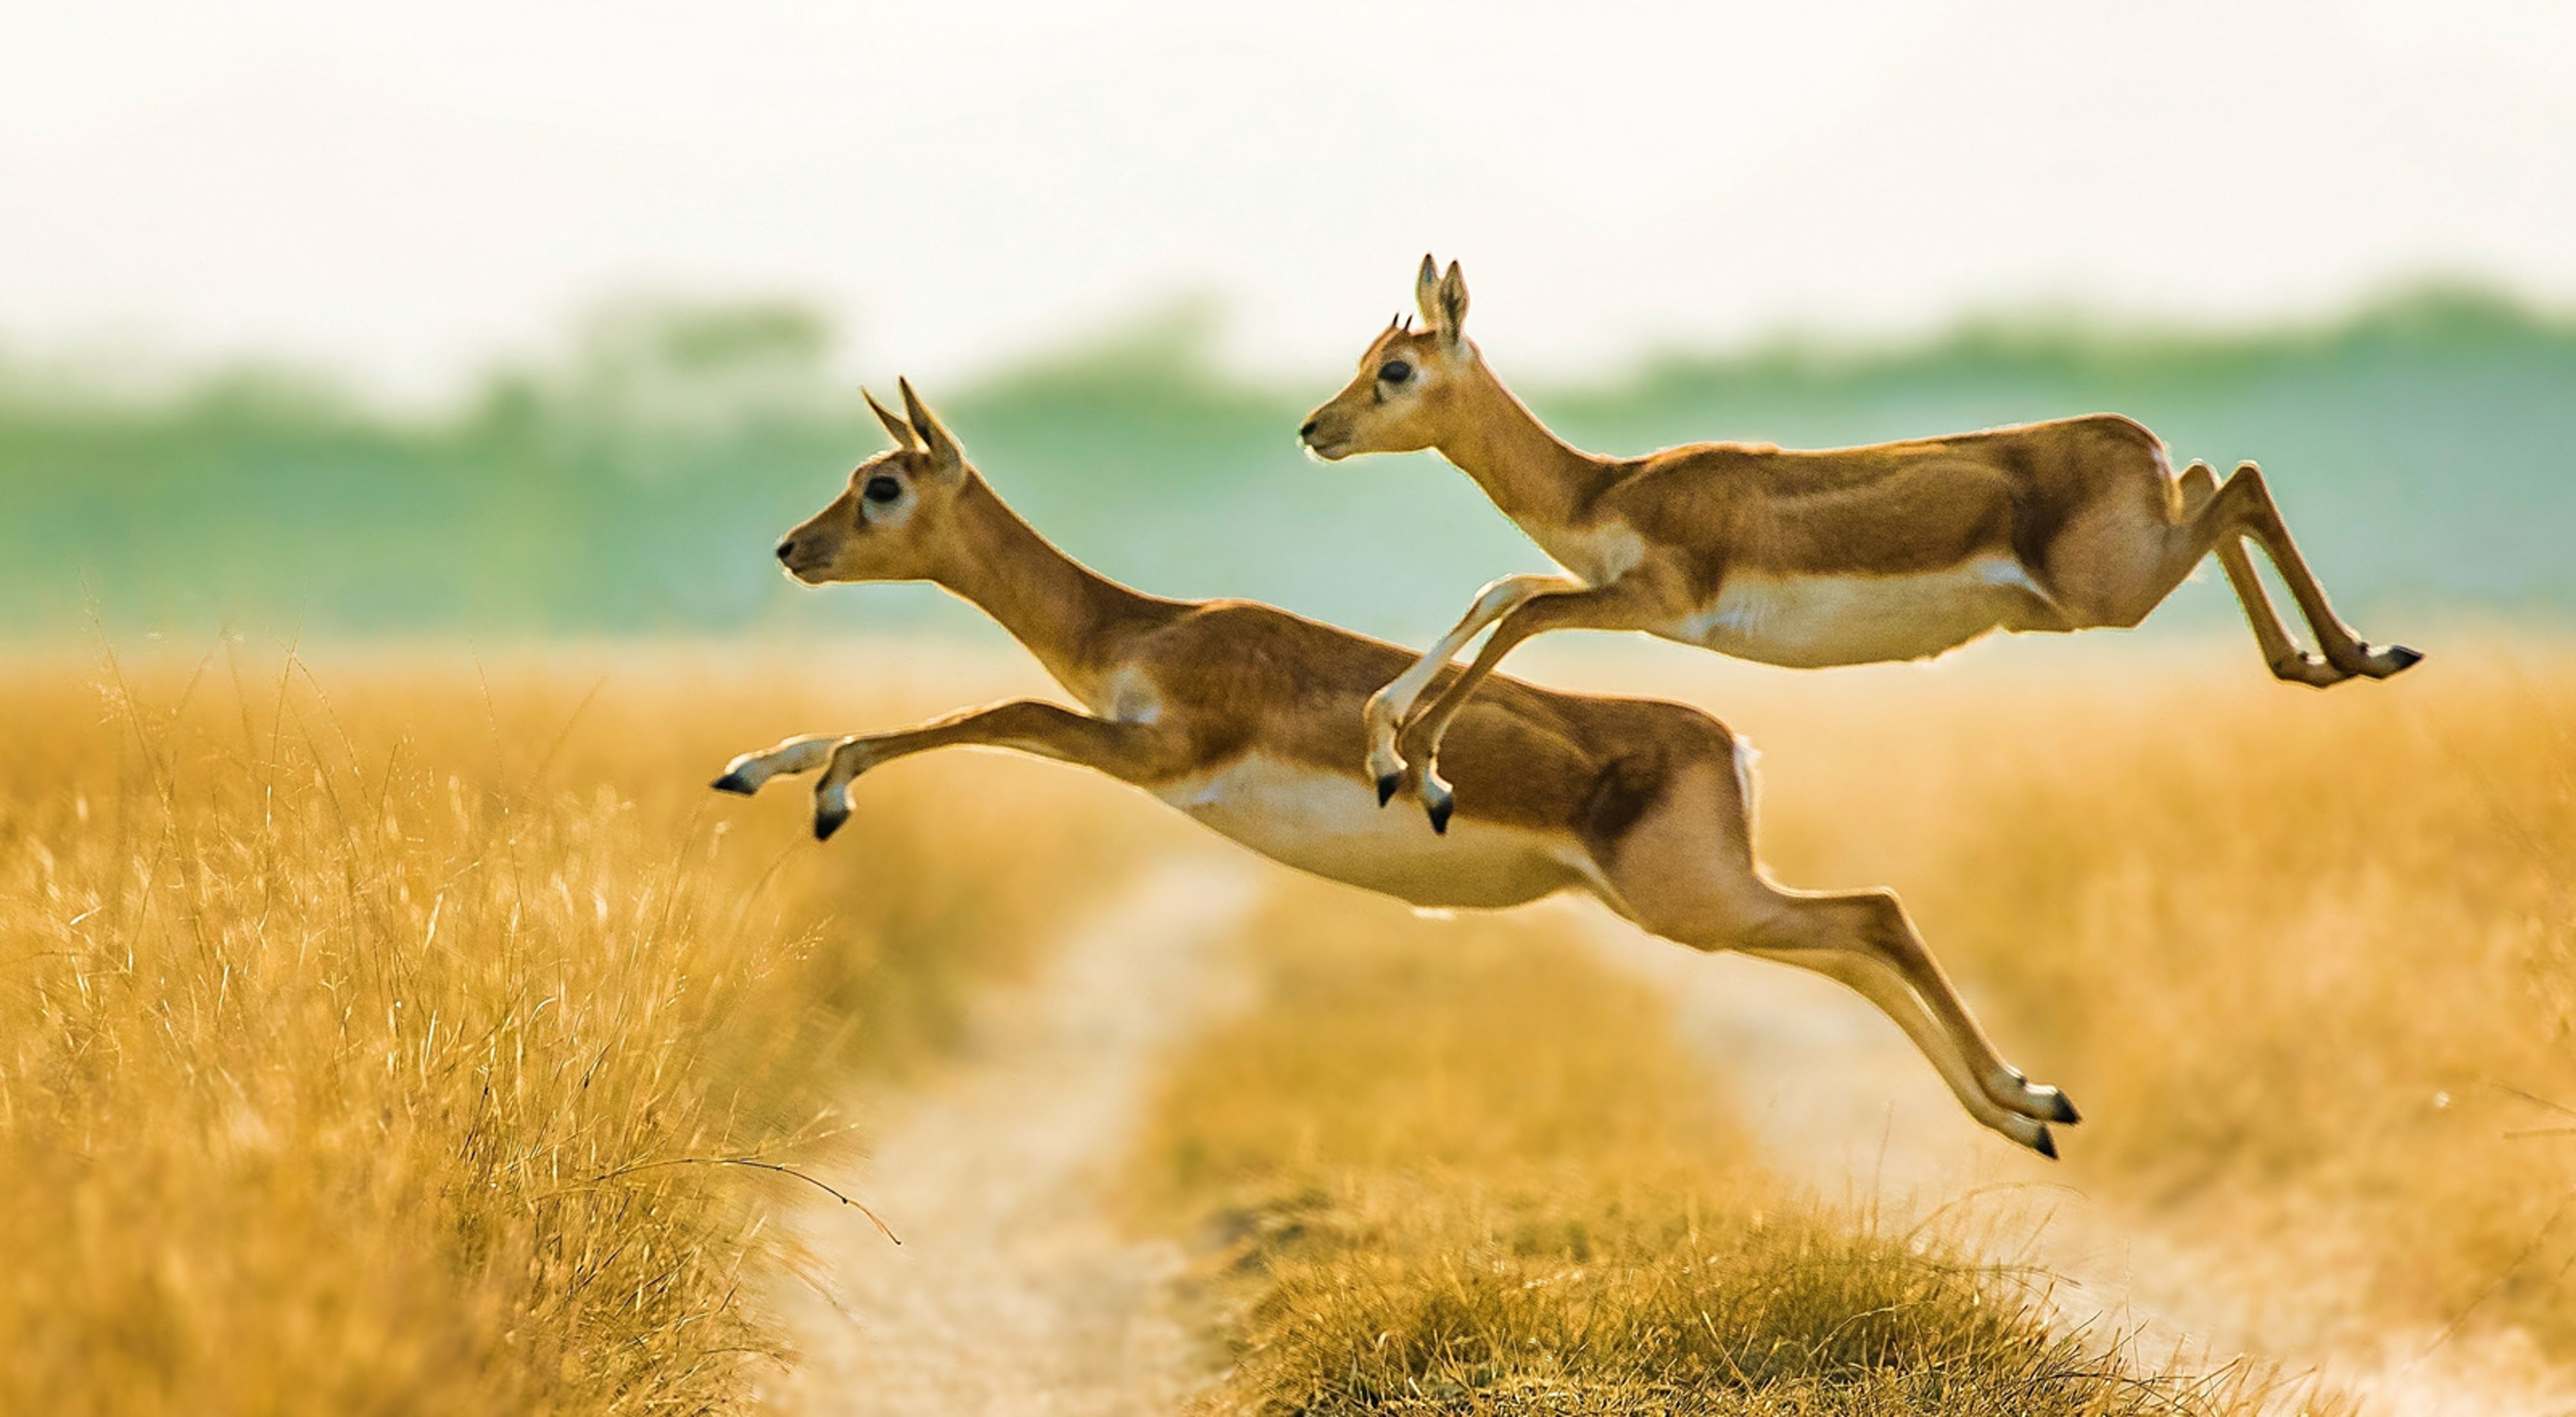 Blackbuck jumping over the muddy trail of the grassland in Talchapar, Rajasthan, India.